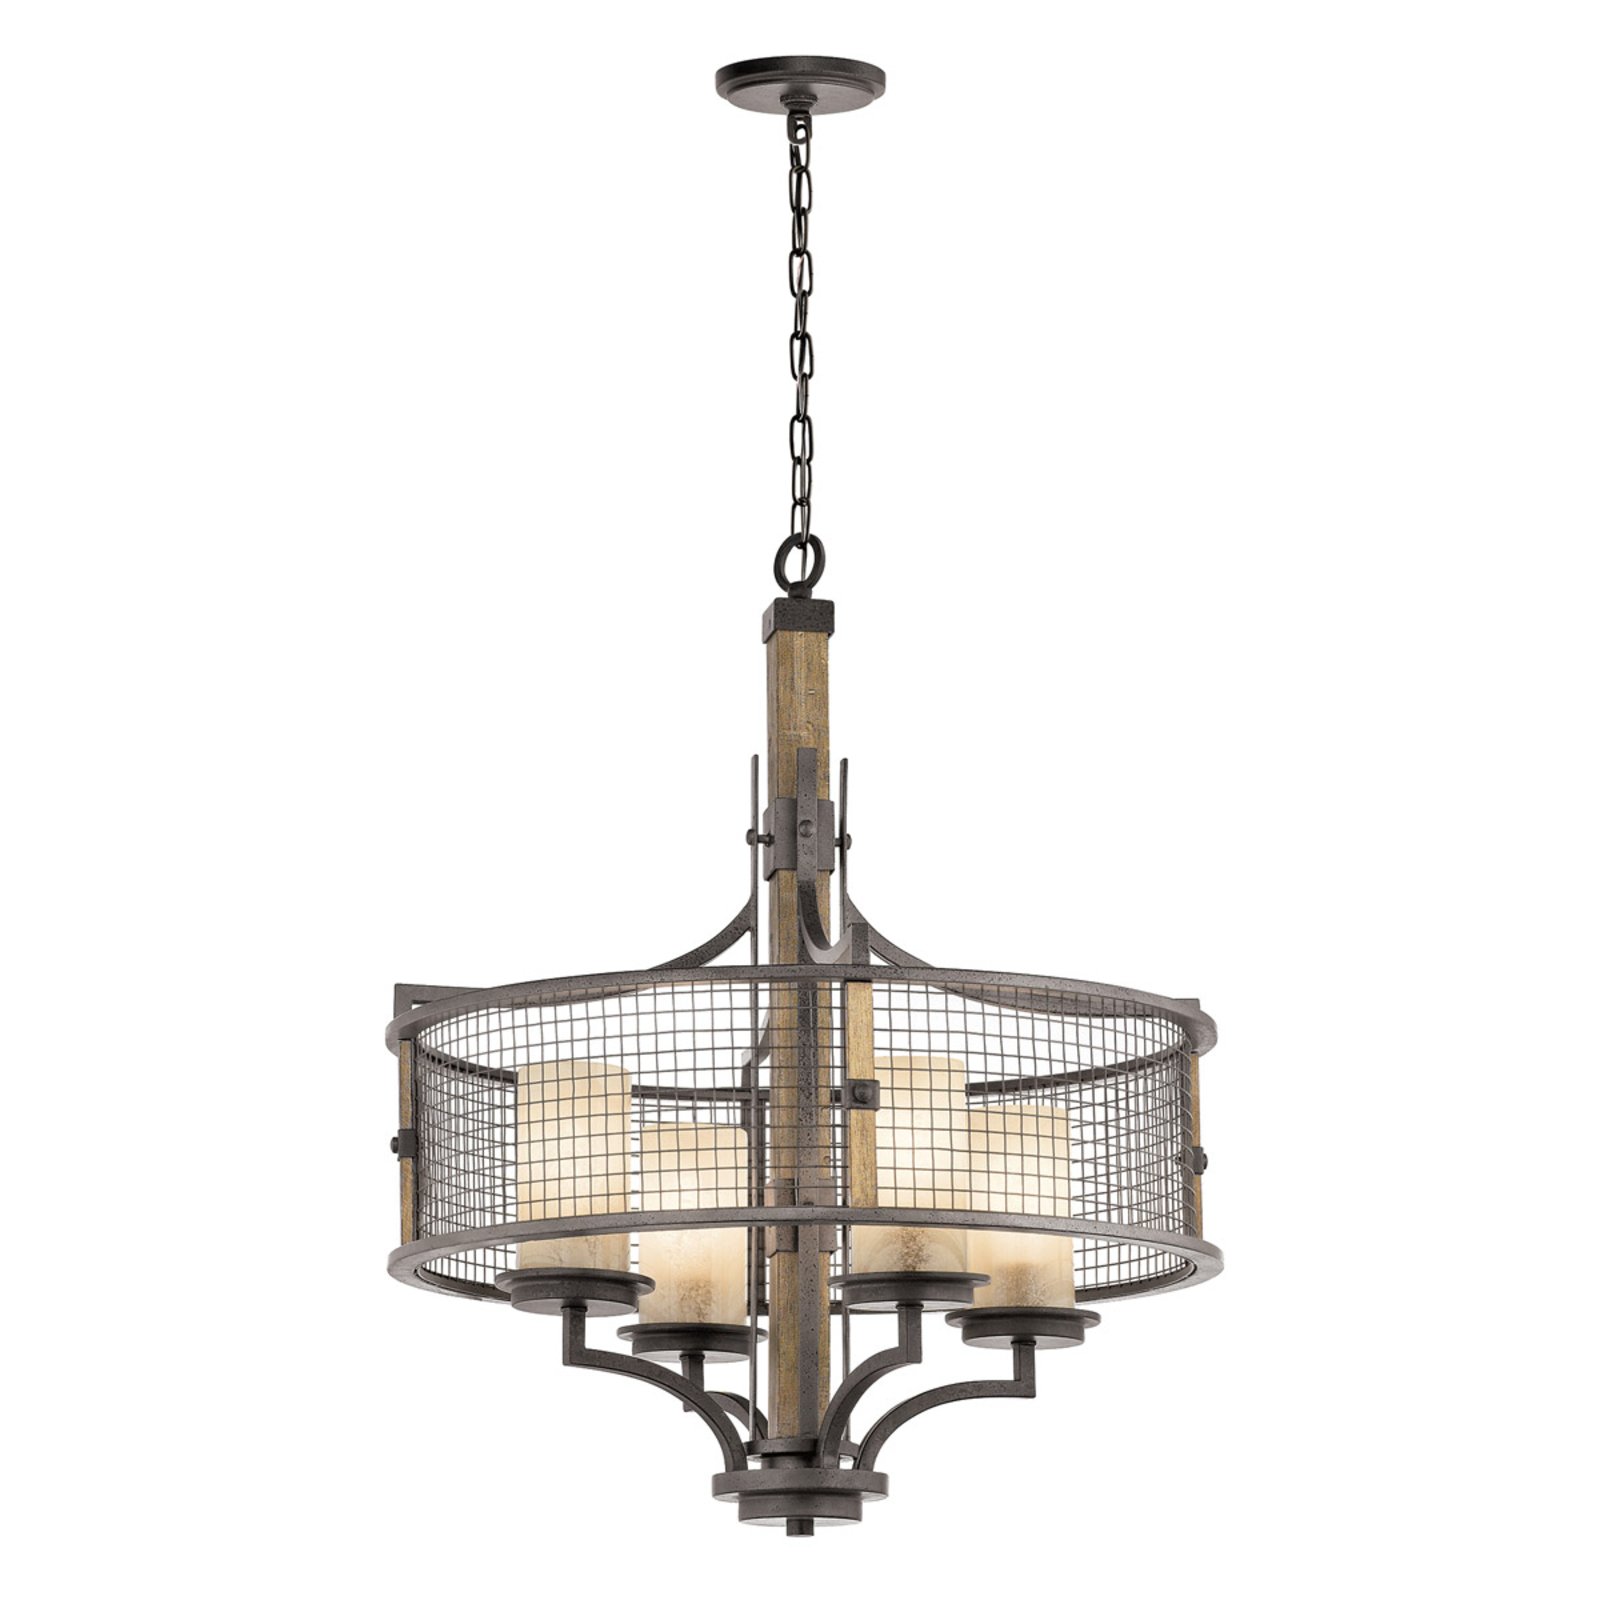 Rustic country style chandelier Ahrendale